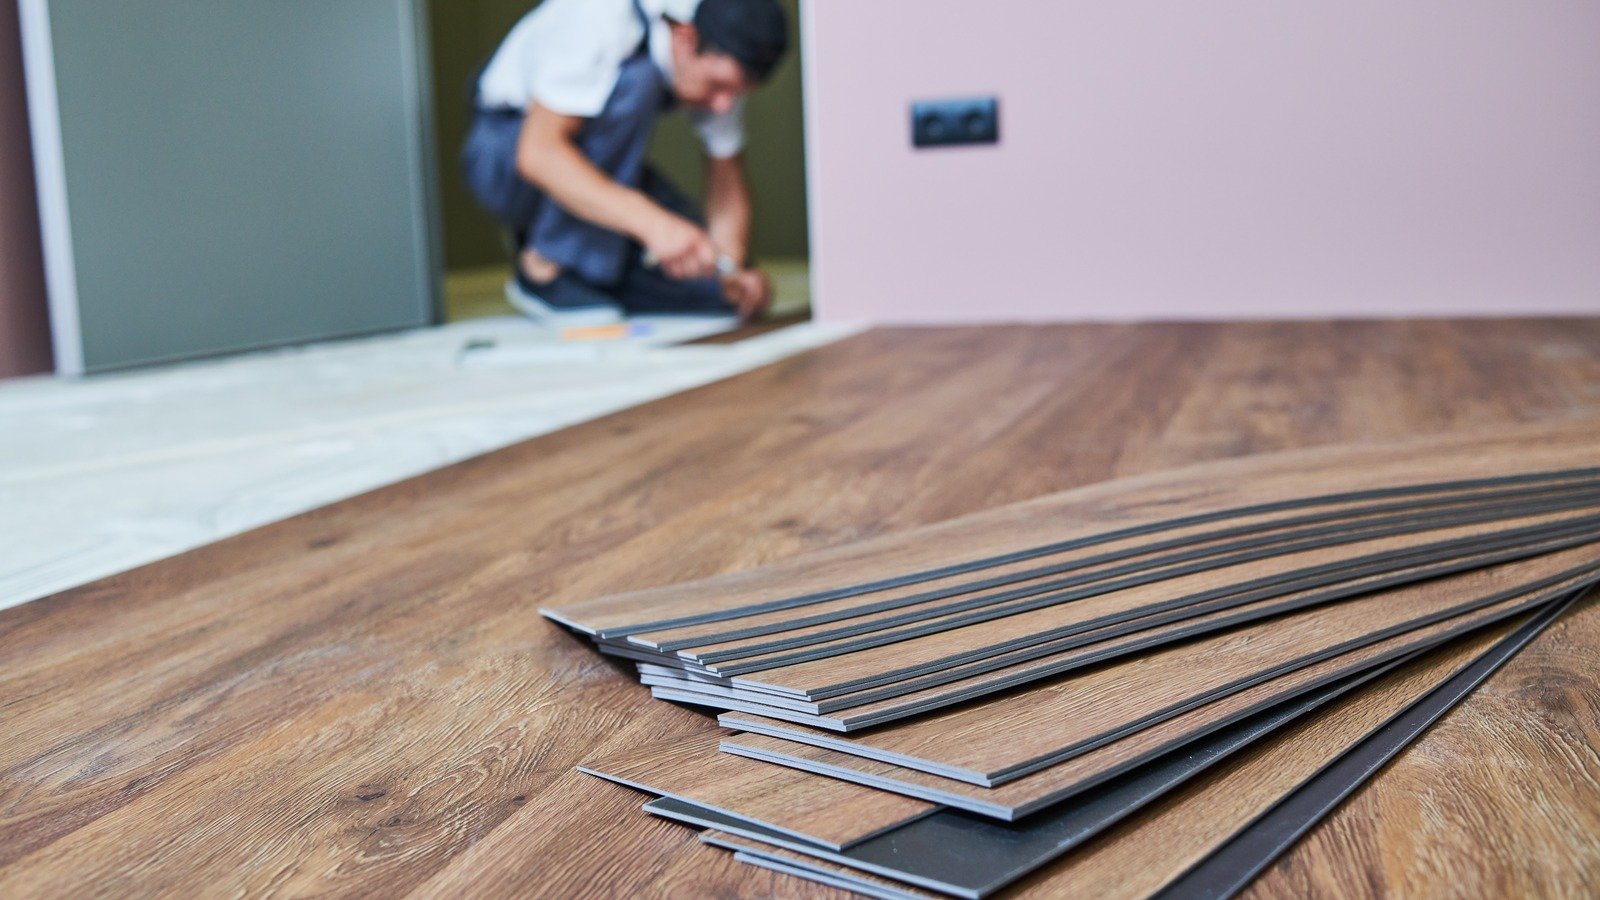 What You Need To Buy From Home Depot To Remove Vinyl Flooring